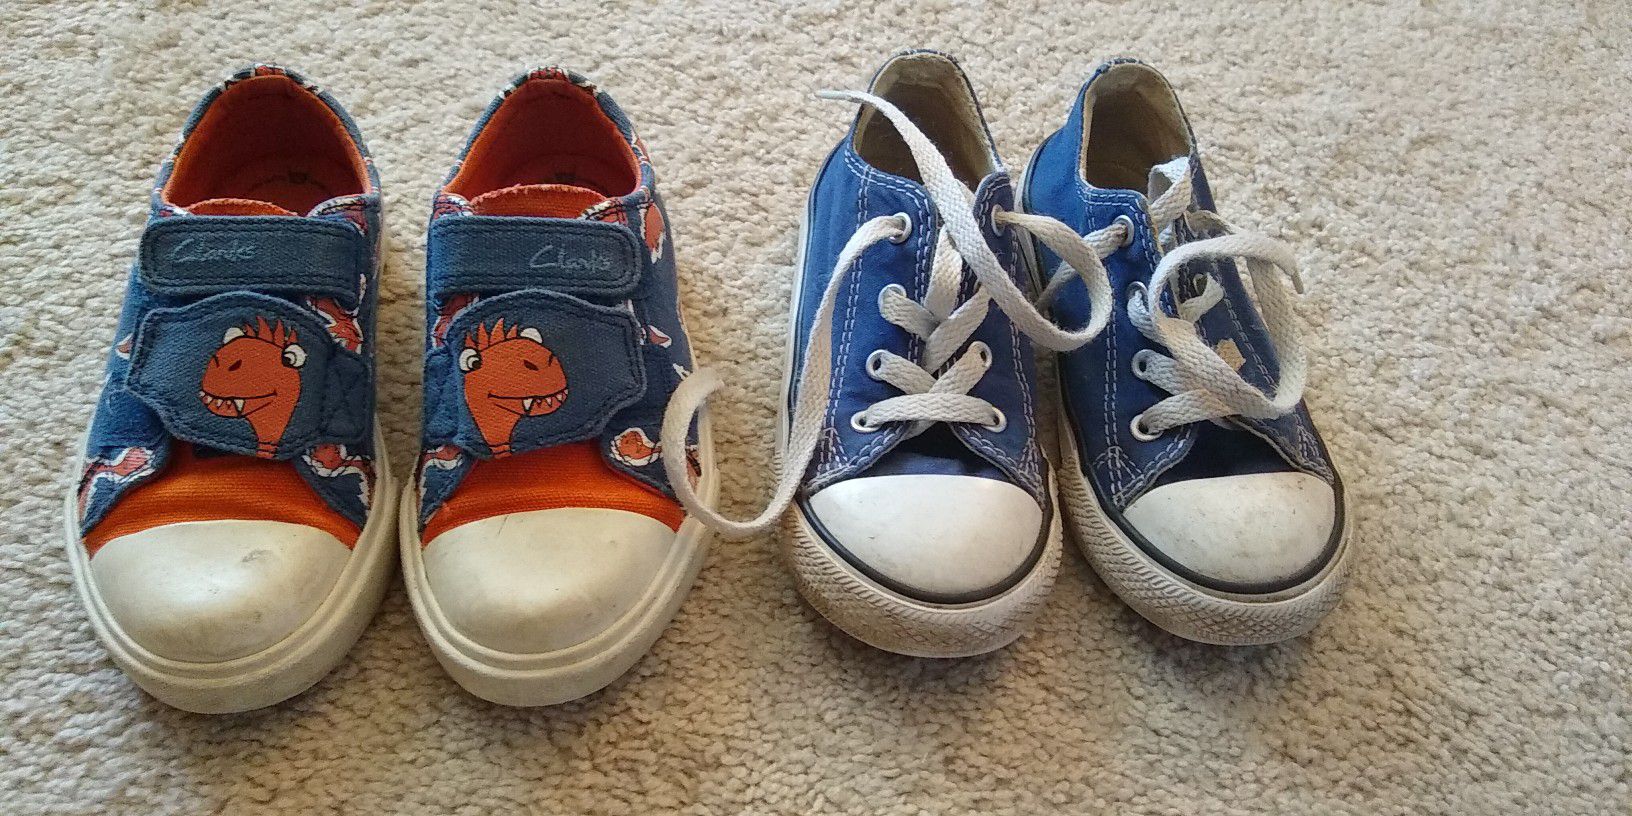 Toddler 9 Clark's and Converse